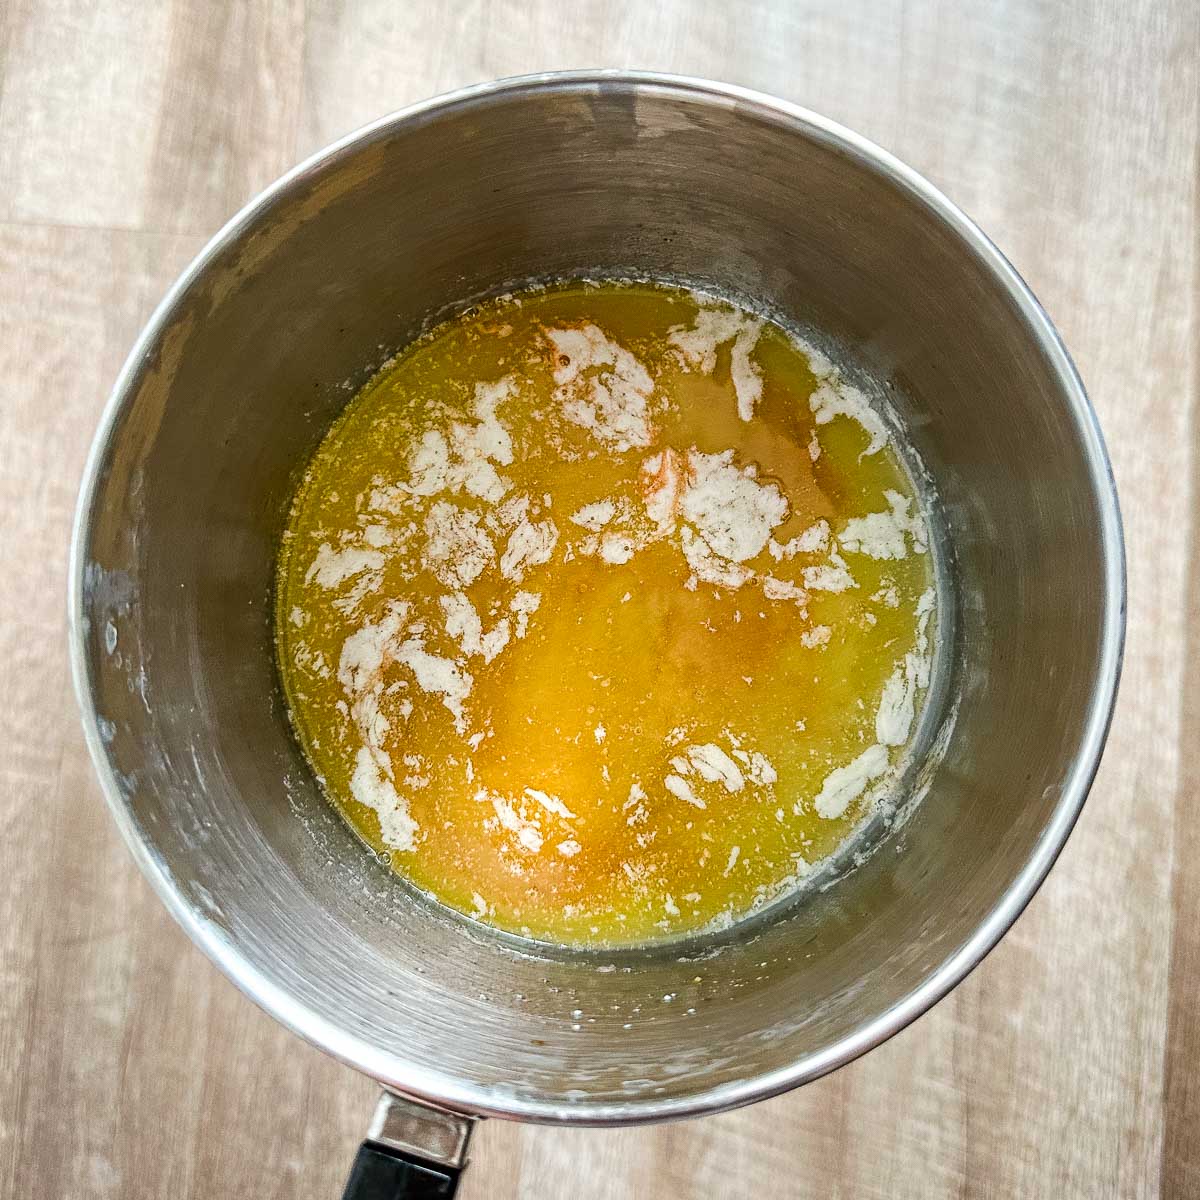 Hot sauce is added to melted butter in a saucepot.